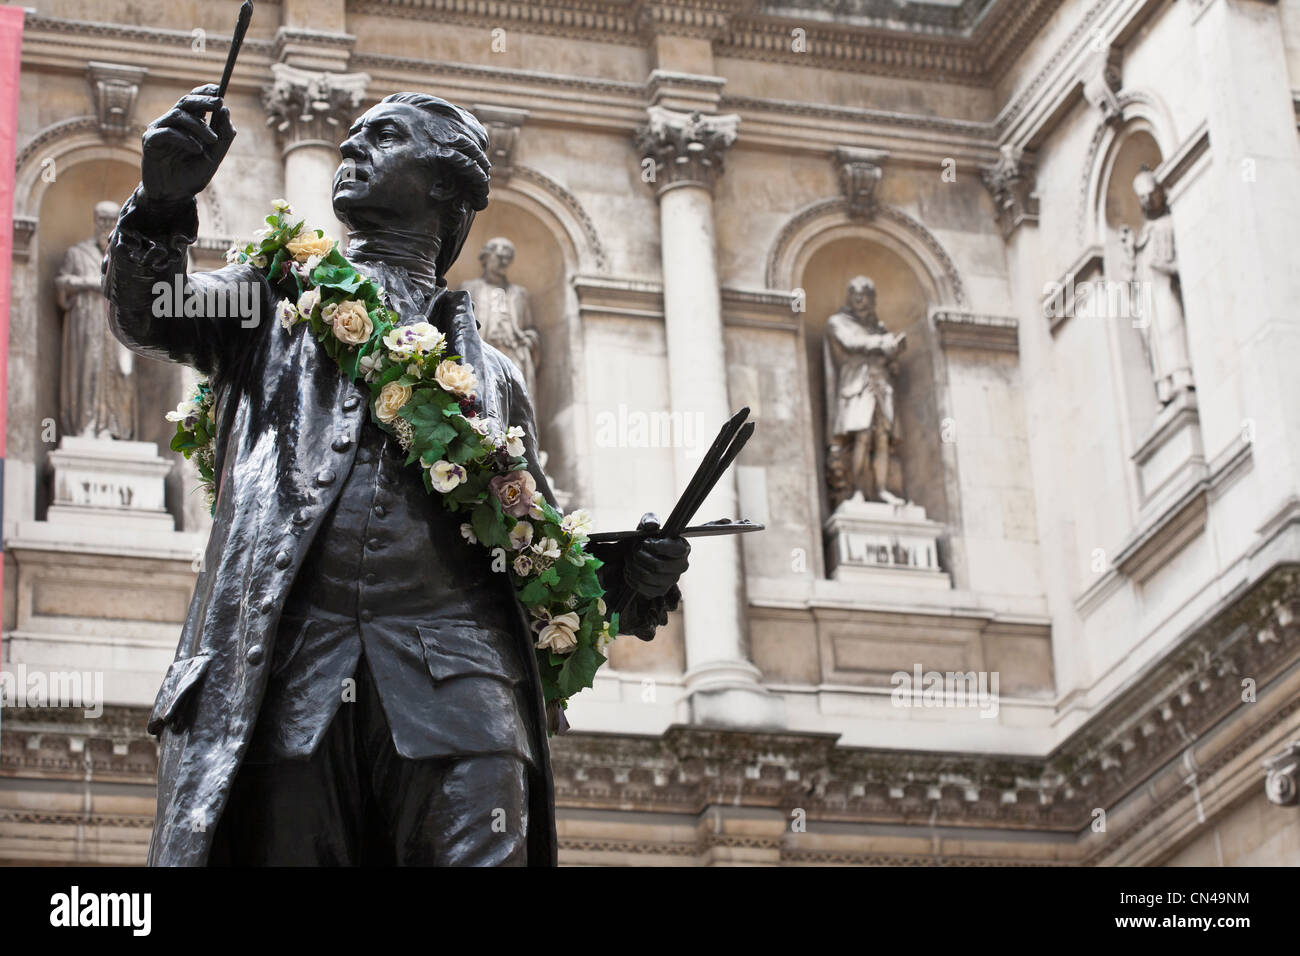 United Kingdom, London, Piccadilly, Royal Academy of Arts founded by king George III in 1768, statue of first academy Stock Photo